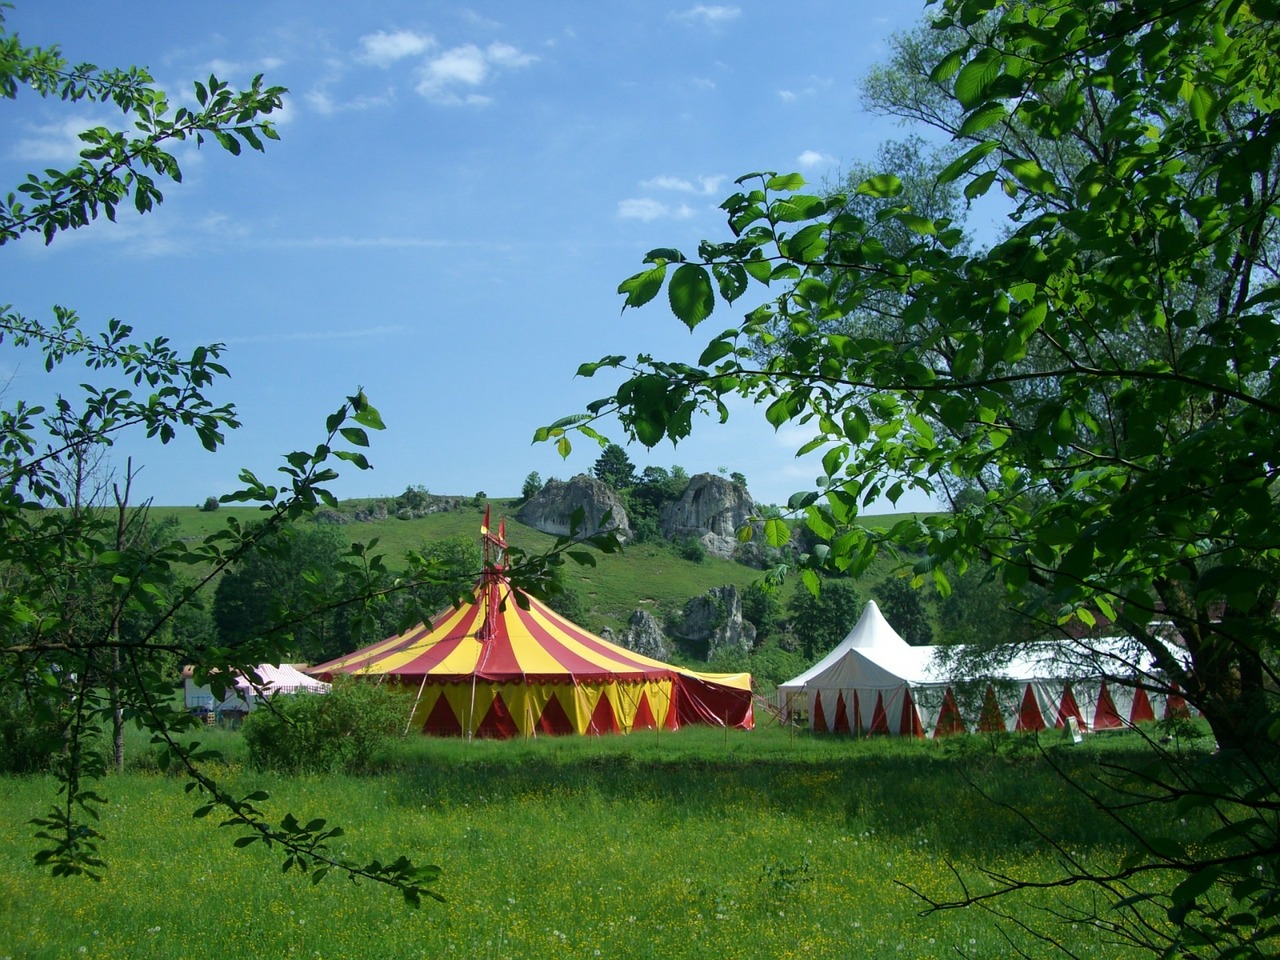 Another circus tent and other fabric structures built using event labour hire.